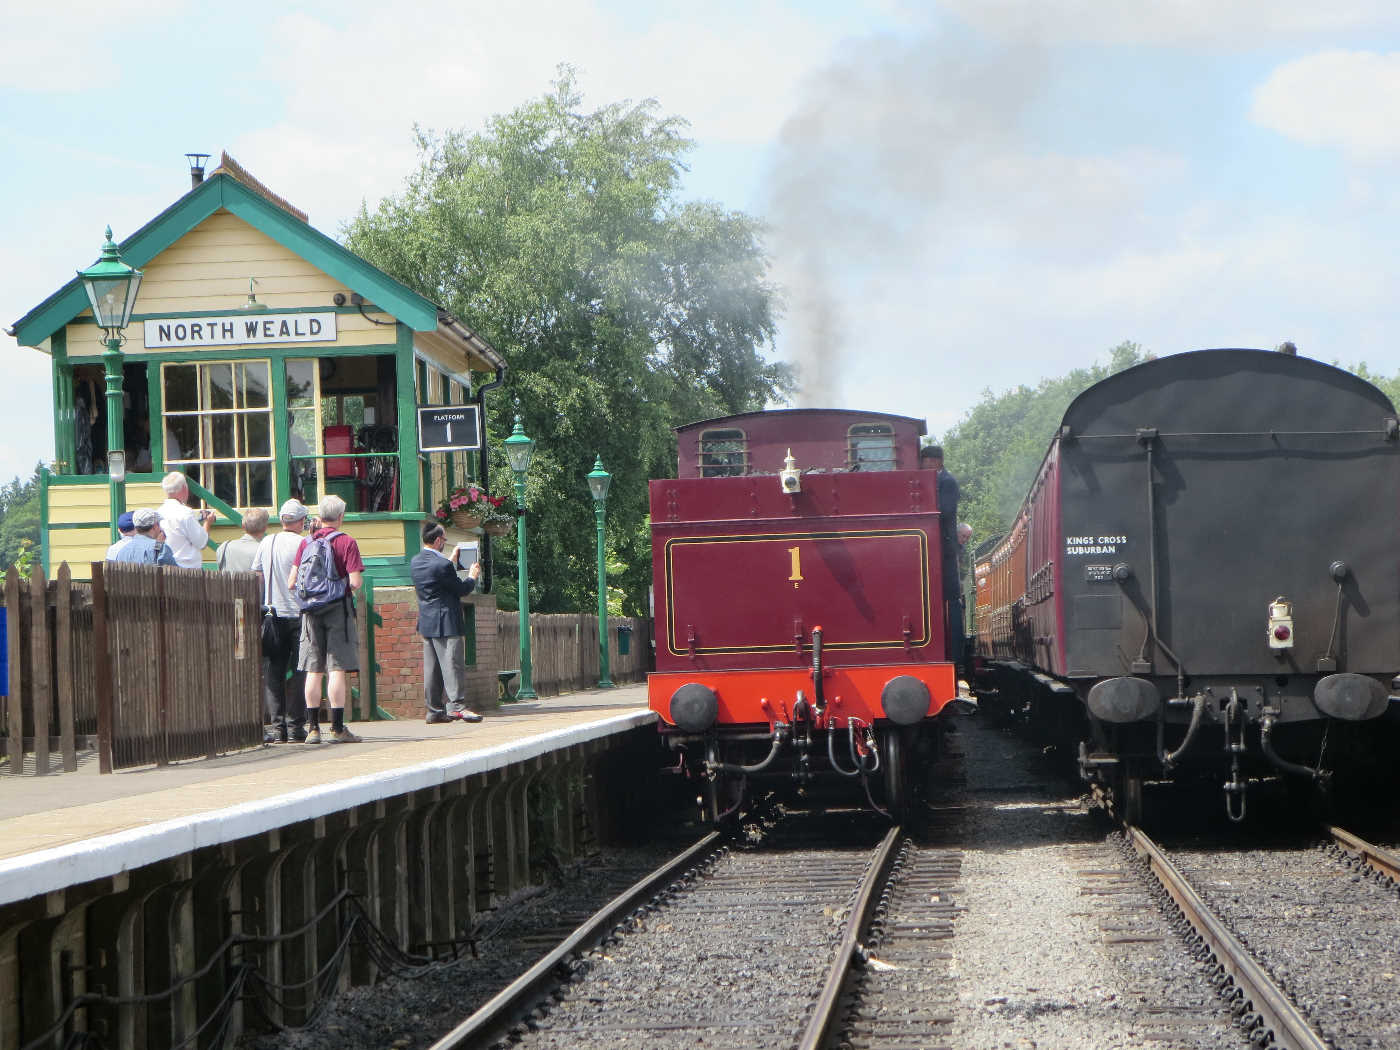 Epping Ongar Railway, North Weald station